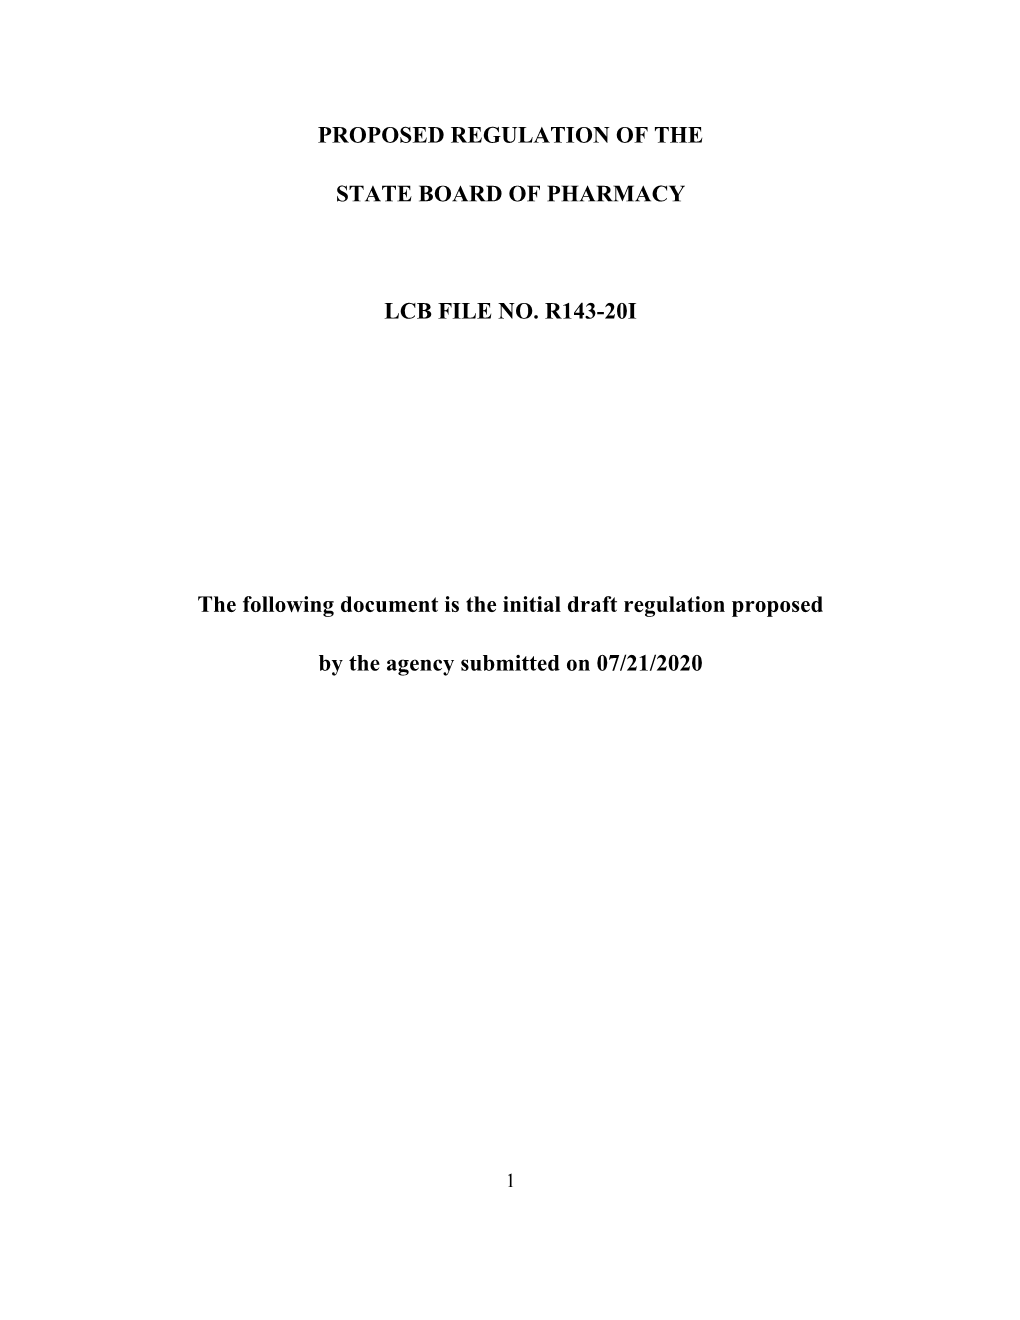 Proposed Regulation of the State Board of Pharmacy